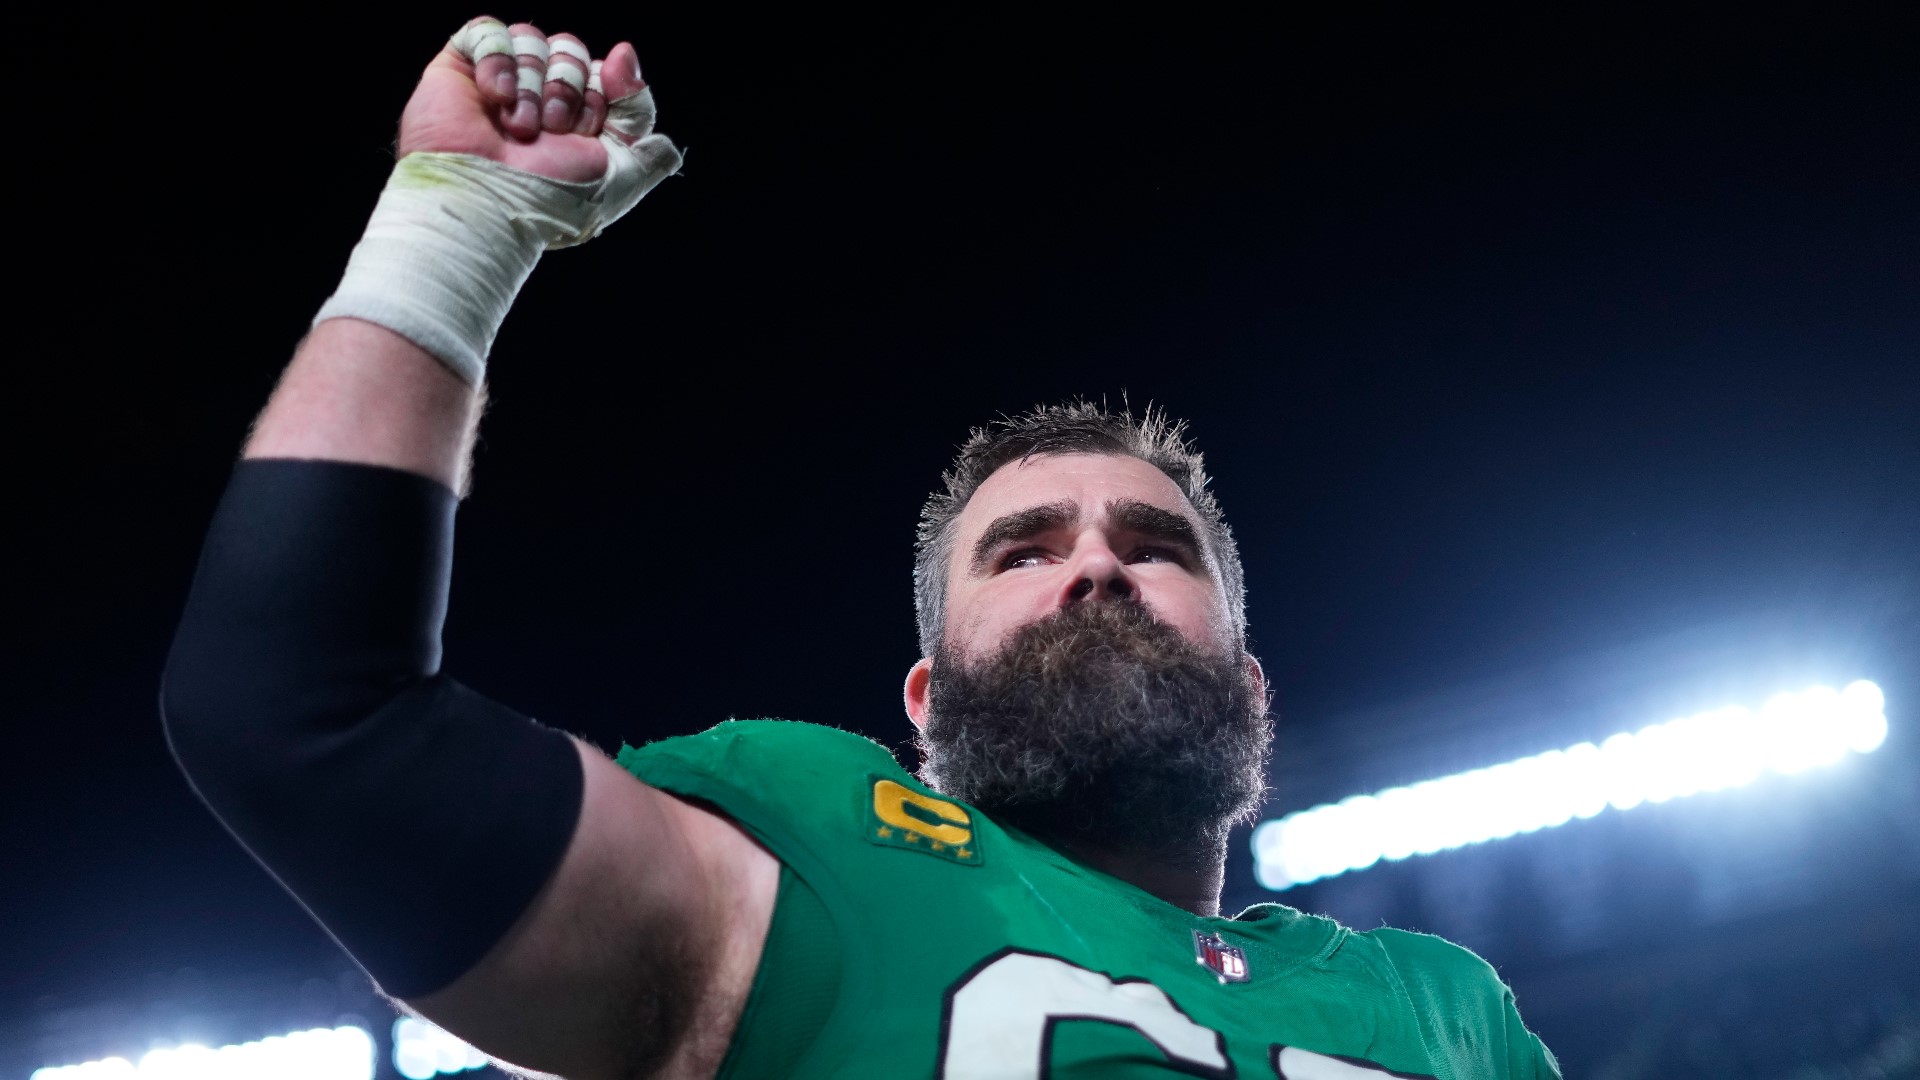 The legendary Eagles center announced his decision to retire after 13 NFL seasons at a press conference Monday afternoon.